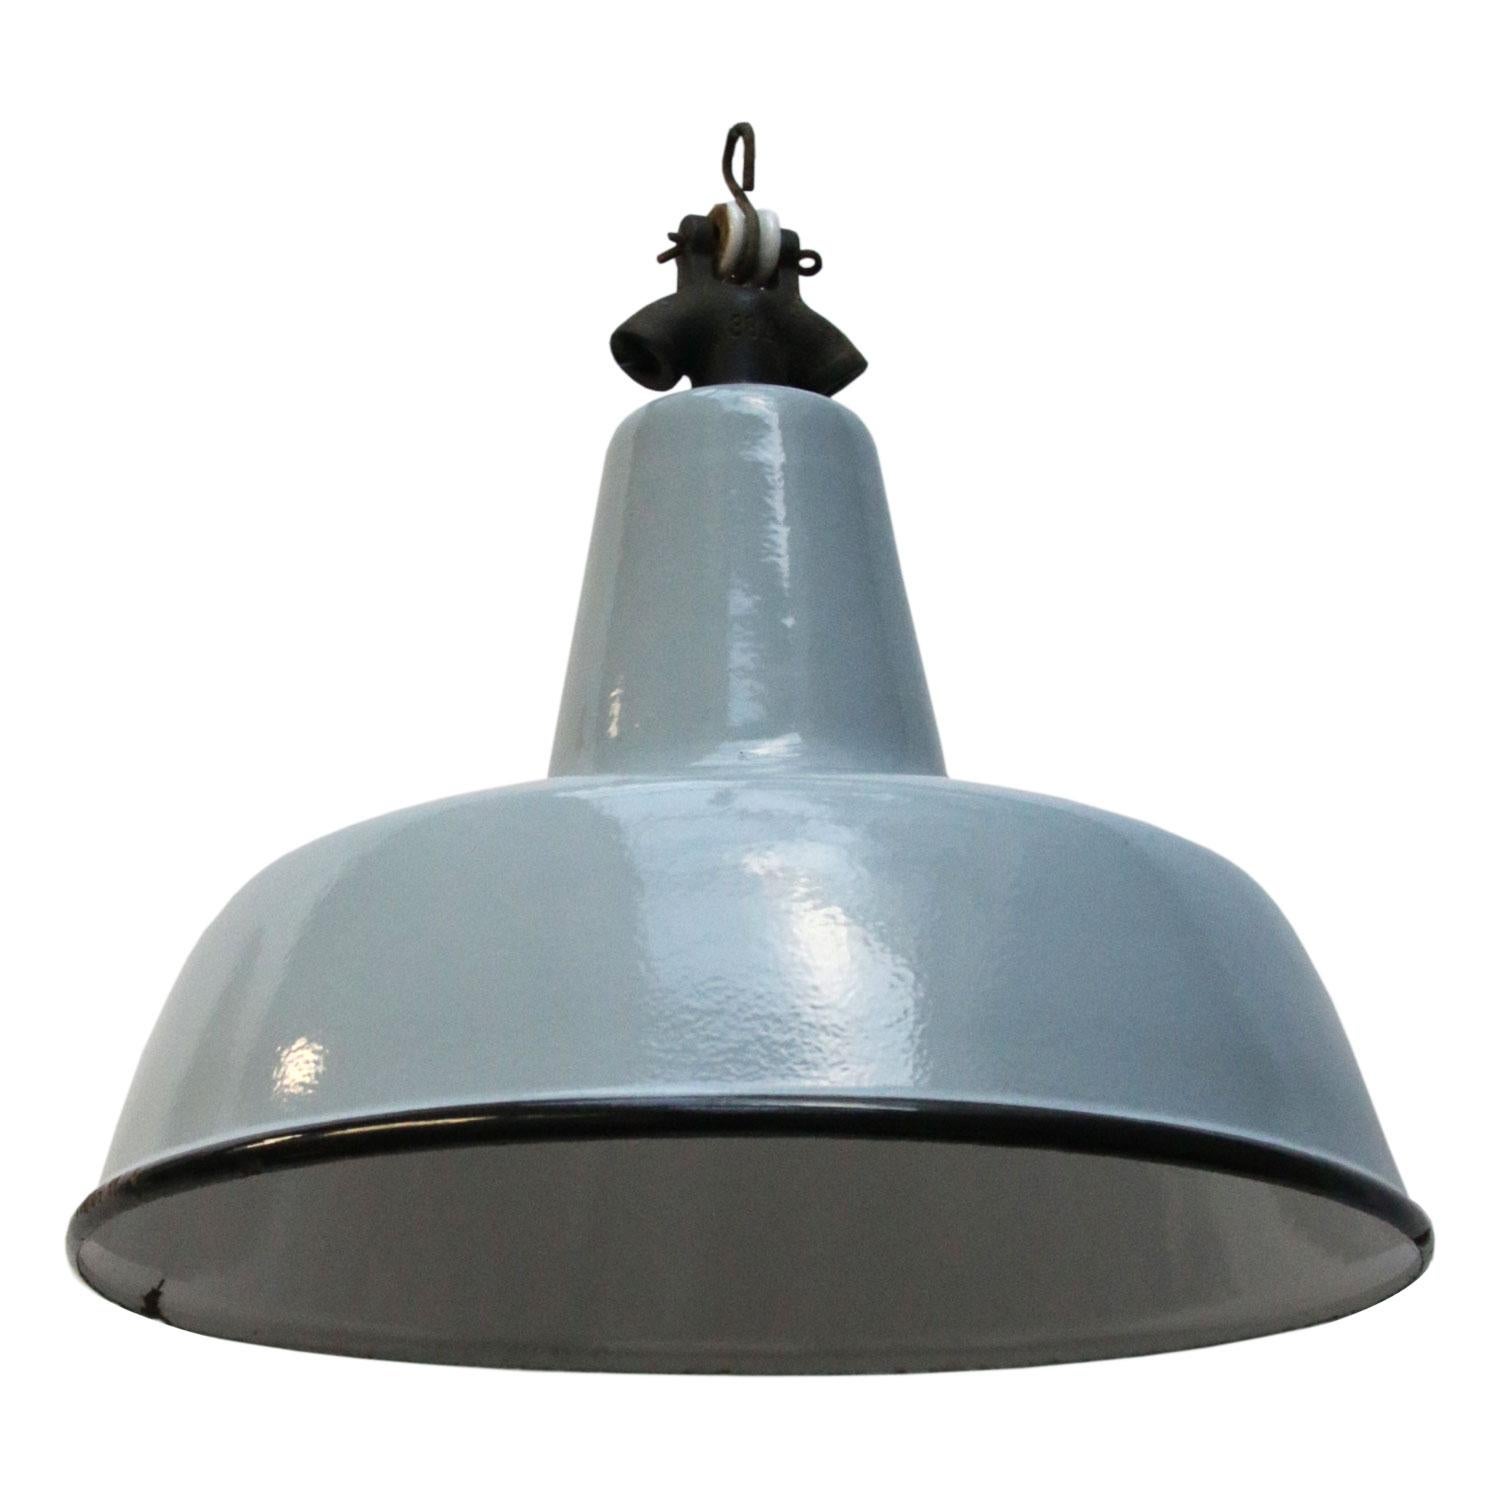 Gray enamel Industrial pendant. White interior.

Weight: 1.2 kg / 2.6 lb

All lamps have been made suitable by international standards for incandescent light bulbs, energy-efficient and LED bulbs. E26/E27 bulb holders and new wiring are CE